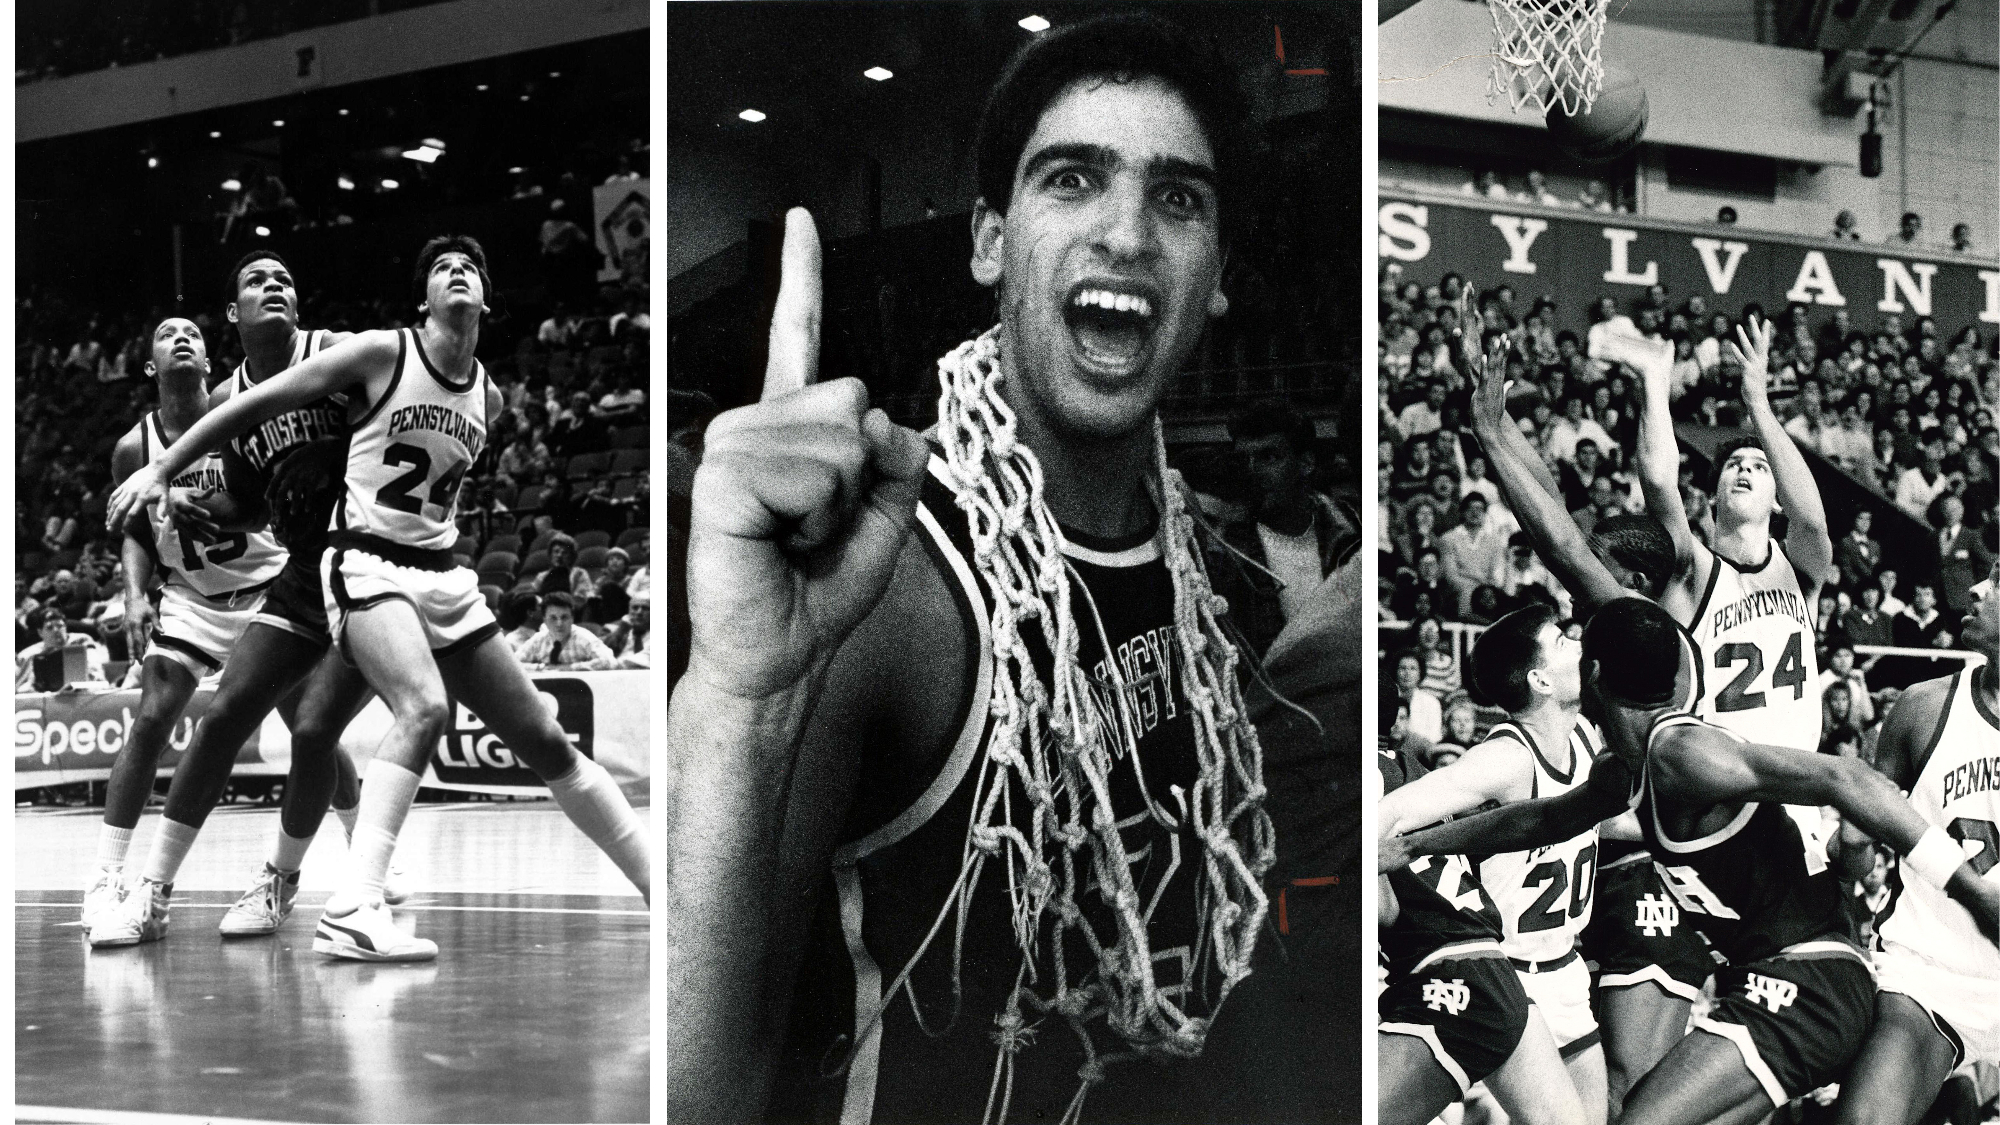 A grid showing Lefkowitz rebounding, celebrating, and shooting during his Penn days.